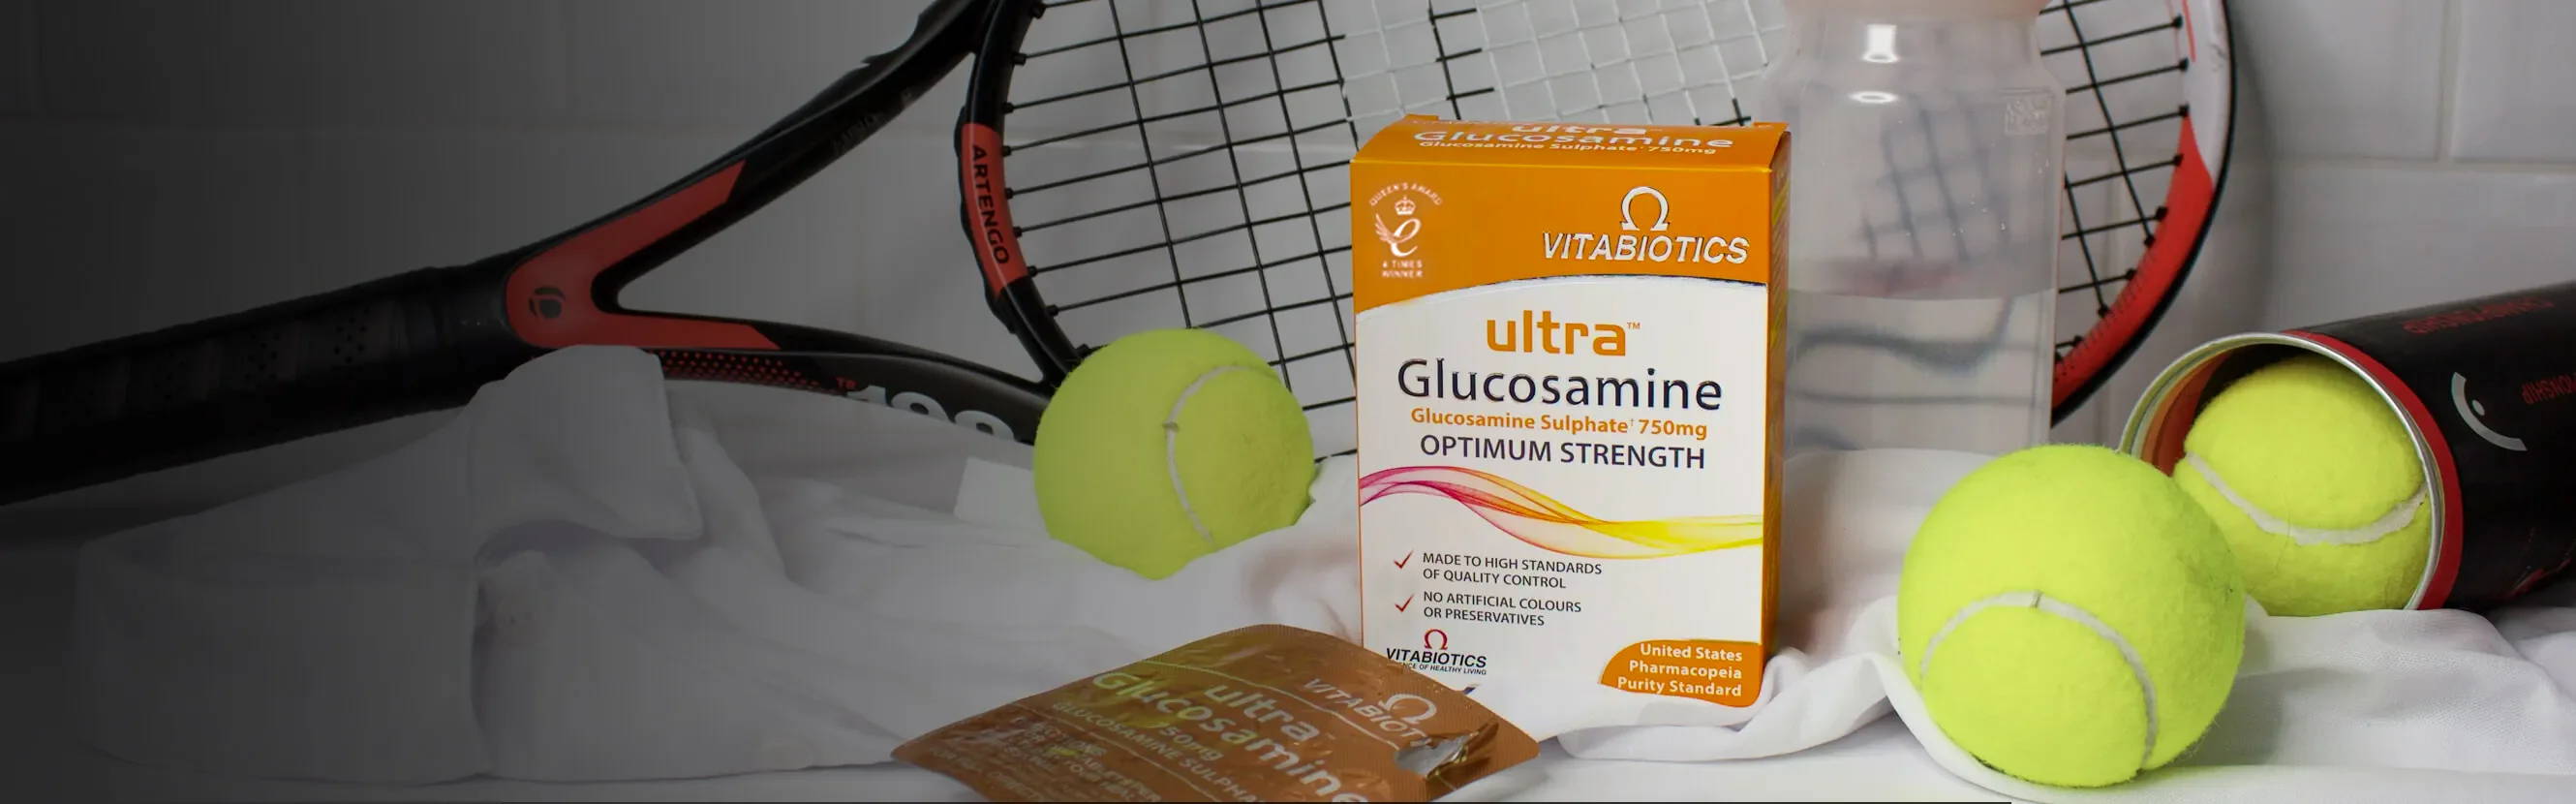  When you’re using Glucosamine supplement, pay special attention to the form it comes in. Unlike sodium forms, the Glucosamine in Ultra Glucosamine is in potassium form, the one that’s preferred for improved absorption. 